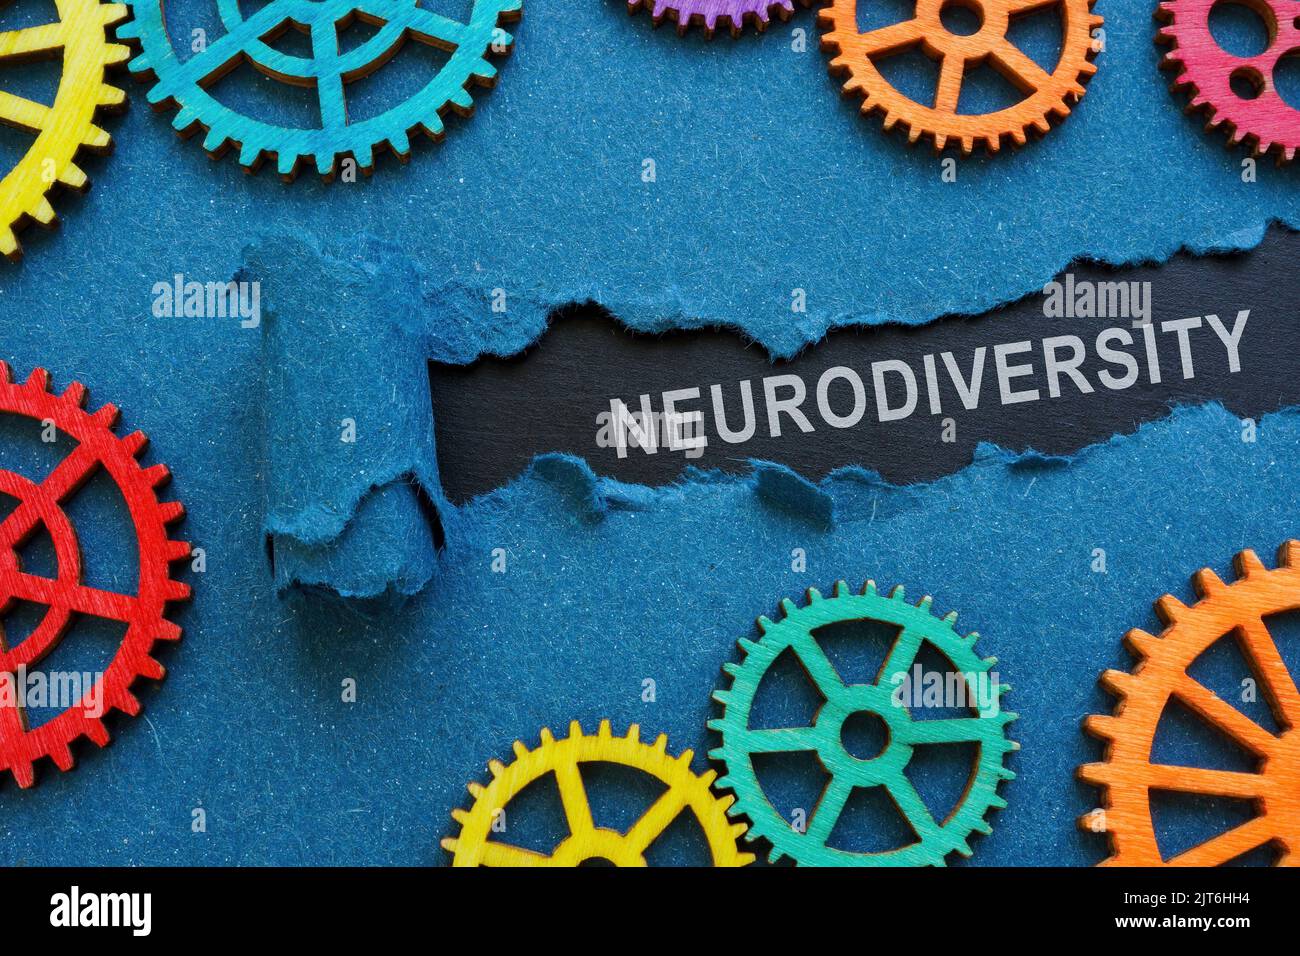 The inscription neurodiversity under the torn paper and gear wheels. Stock Photo